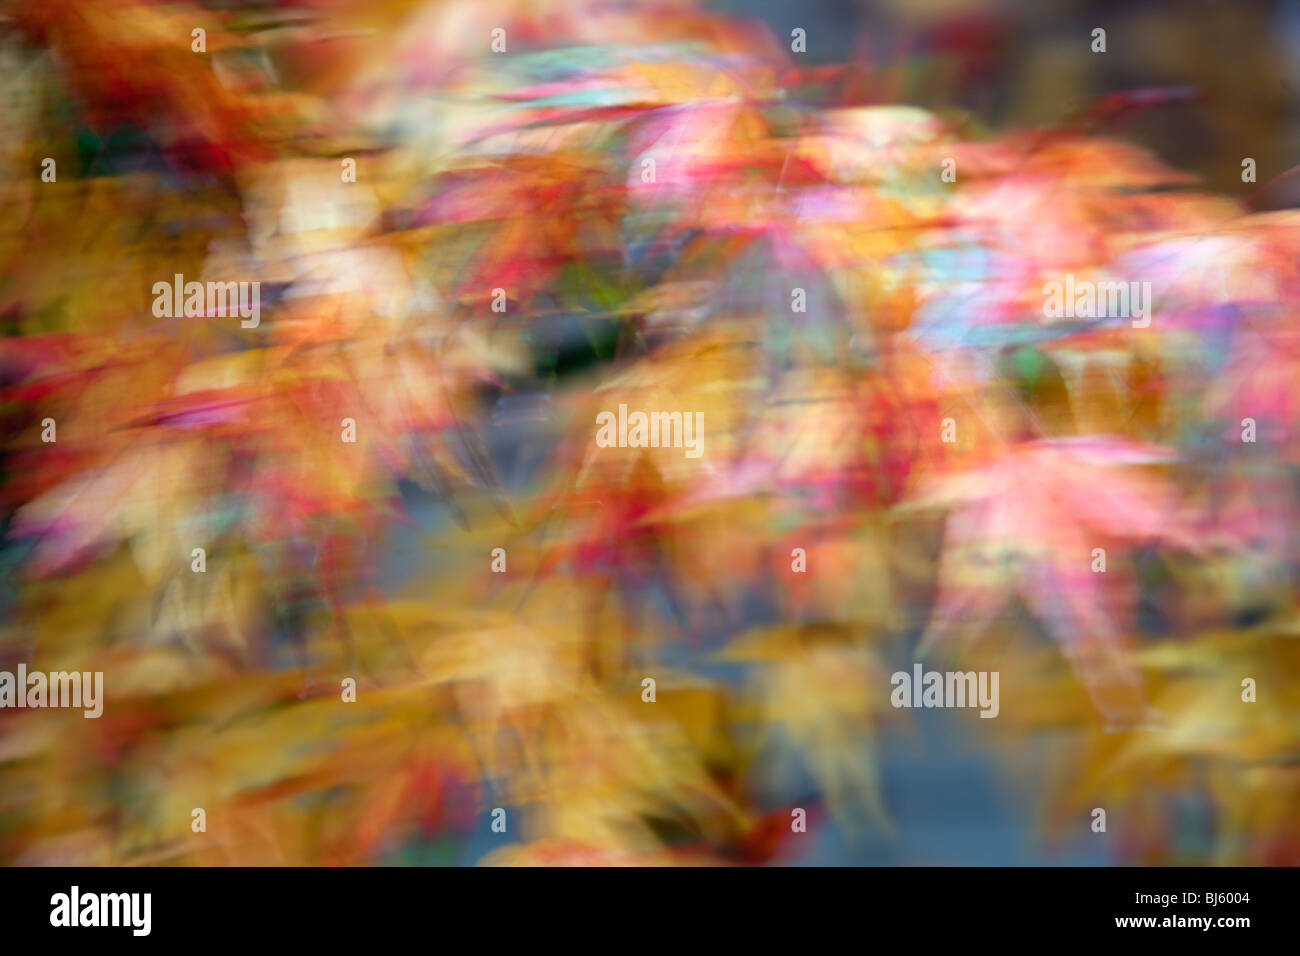 Autumn leaves abstract. Stock Photo